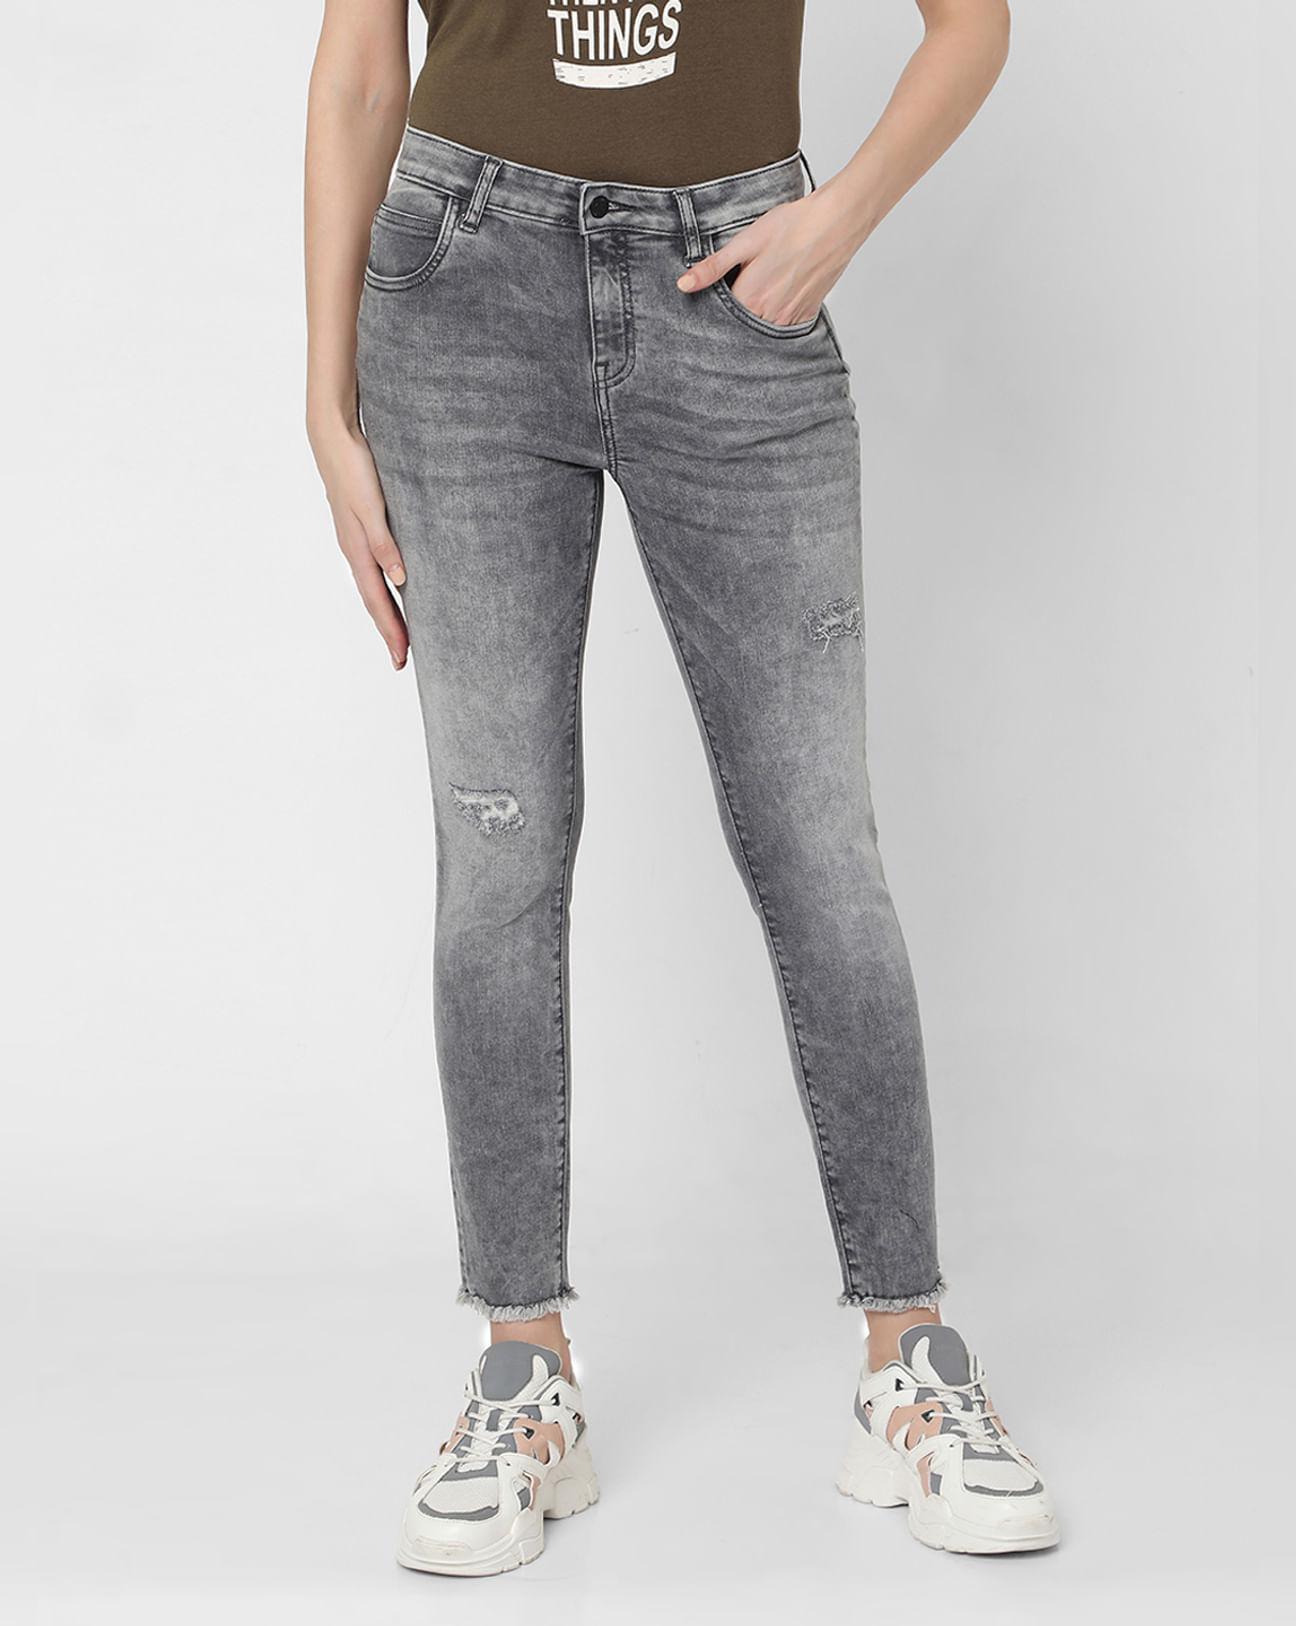 grey-high-rise-frayed-skinny-jeans